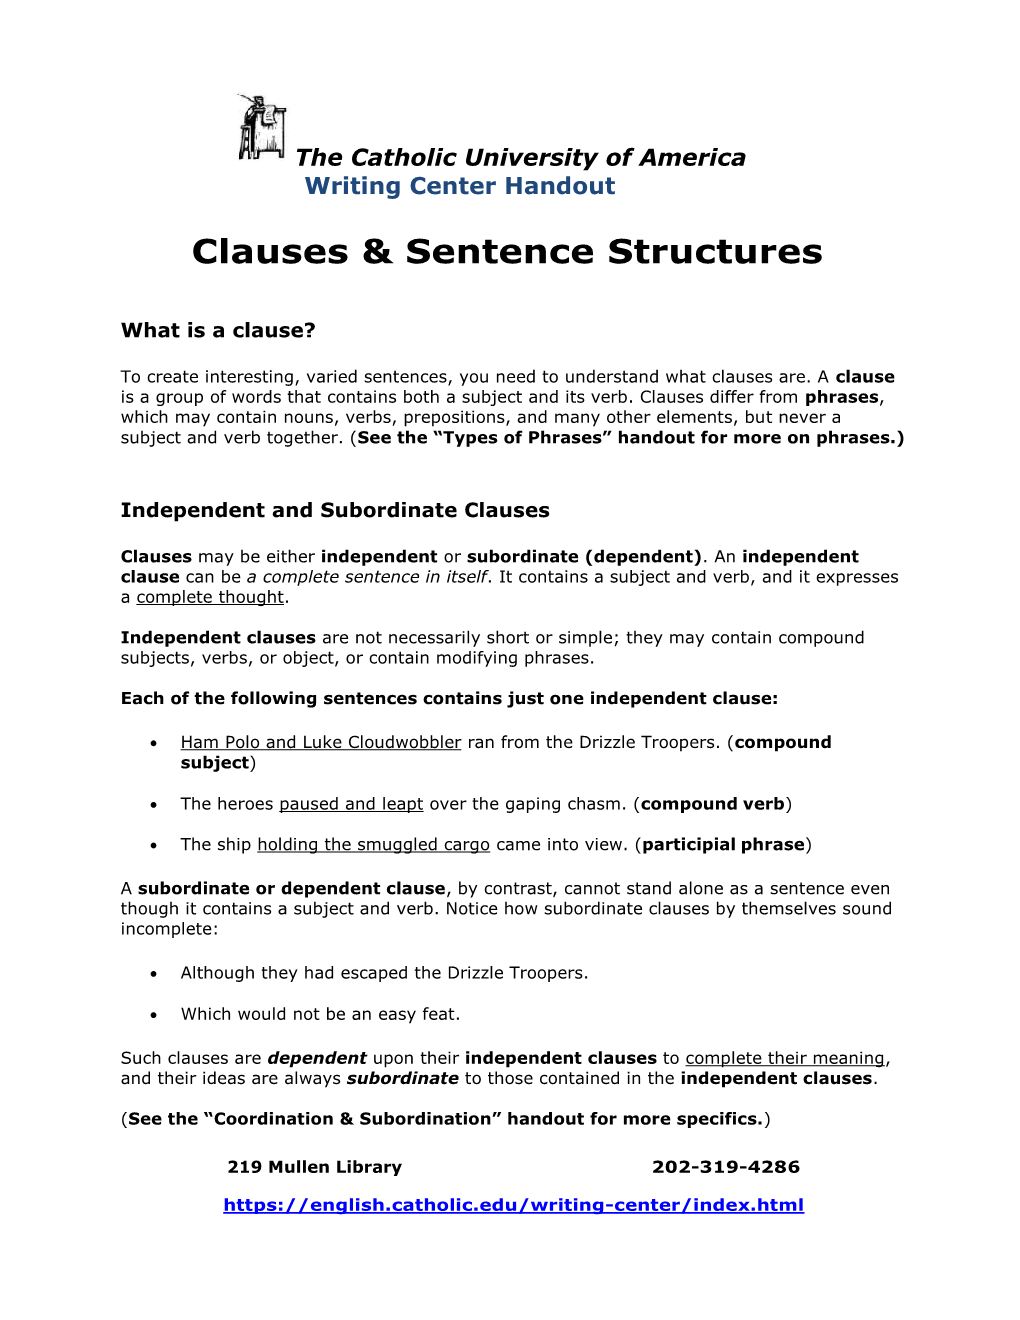 Clauses & Sentence Structures